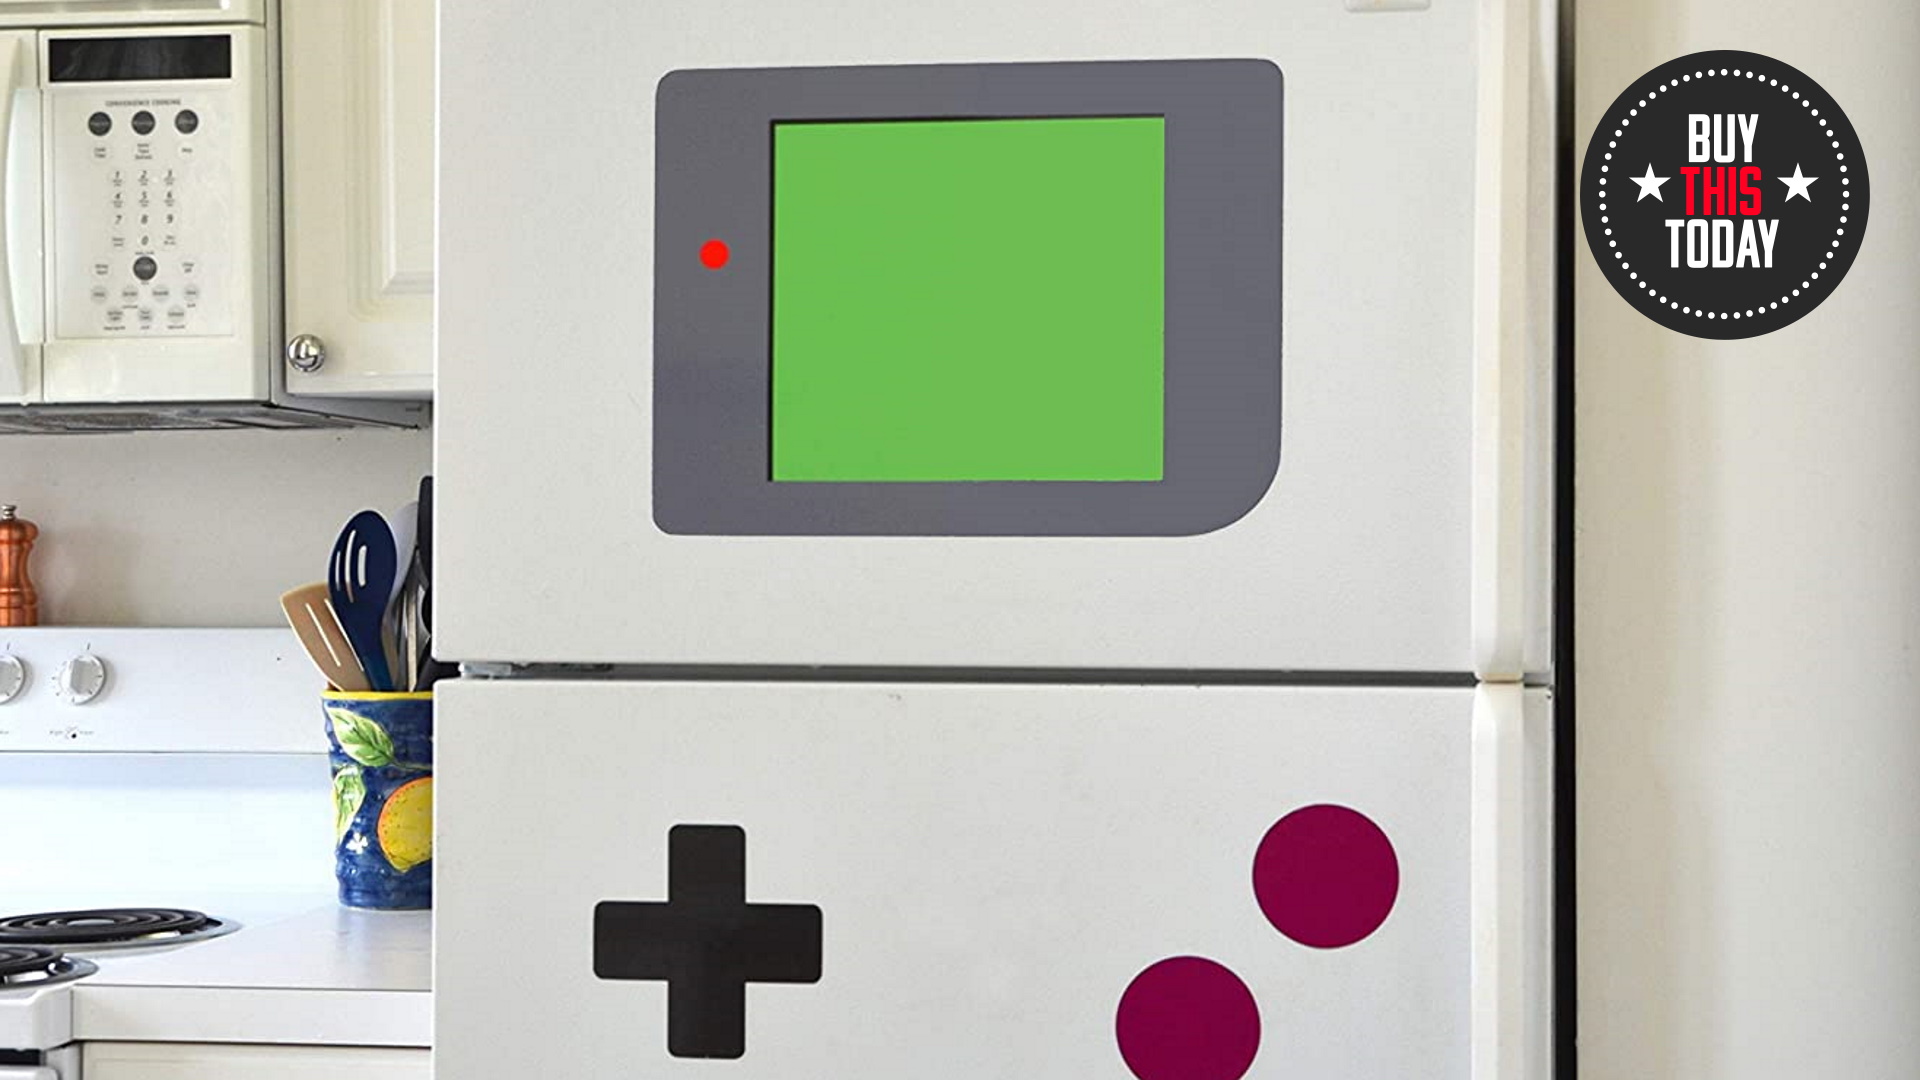 Buy this today: that turn your refrigerator into a Game Boy |